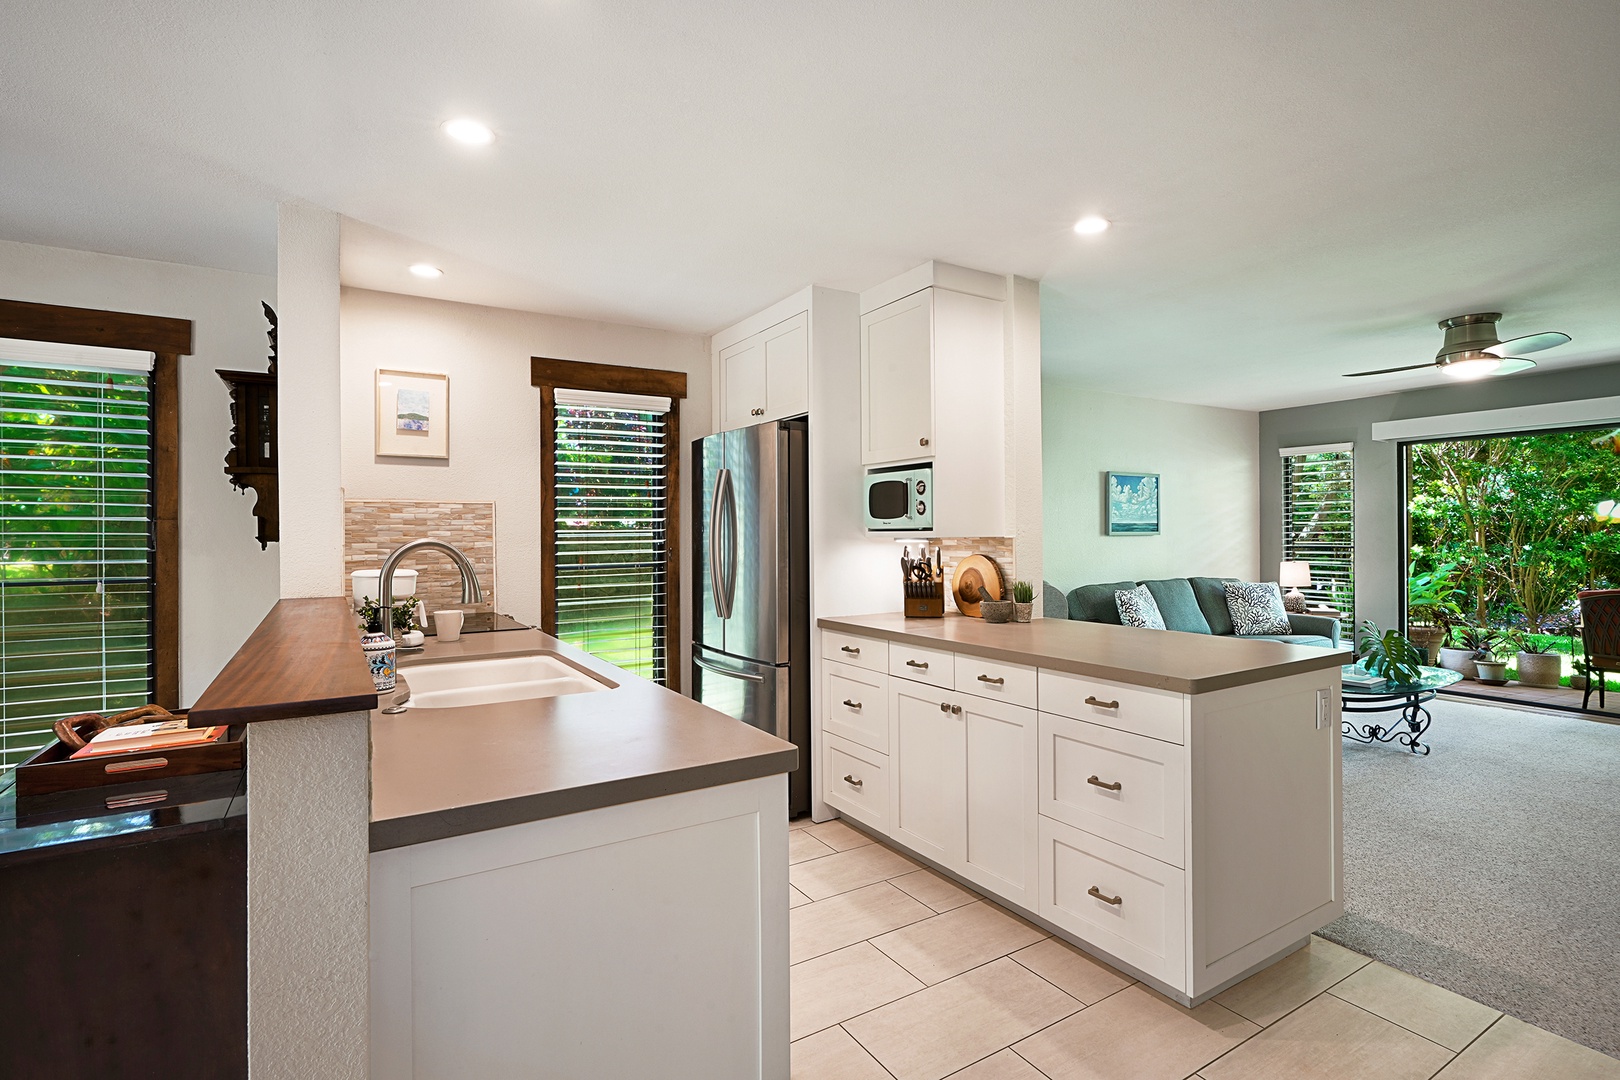 Koloa Vacation Rentals, Waikomo Streams 203 - An inviting culinary haven: the kitchen combines functionality and style, creating a space where delicious memories are made